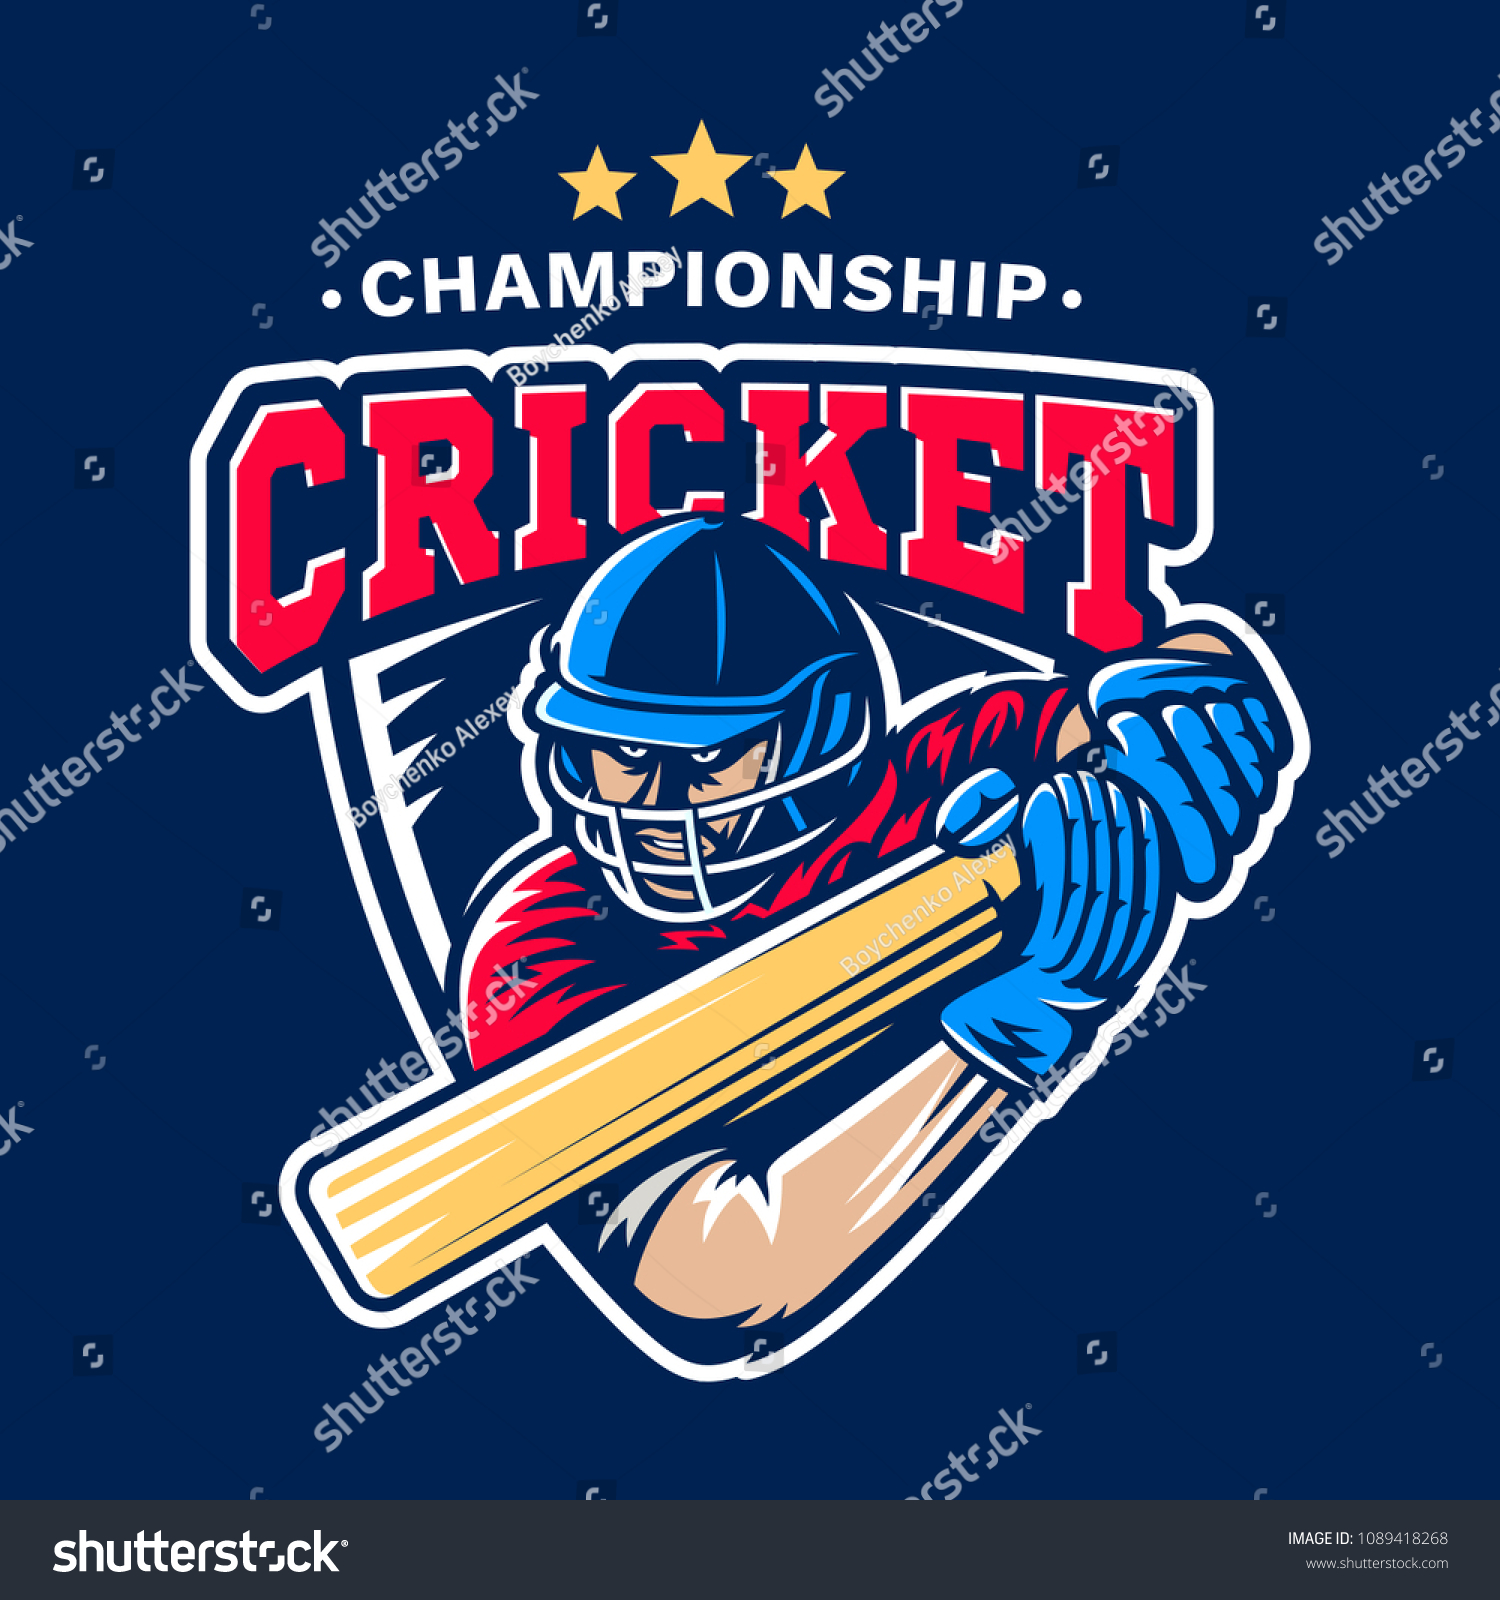 SVG of Cricket Championship - sports emblem, illustration with of a batsman with a bat in his hands svg